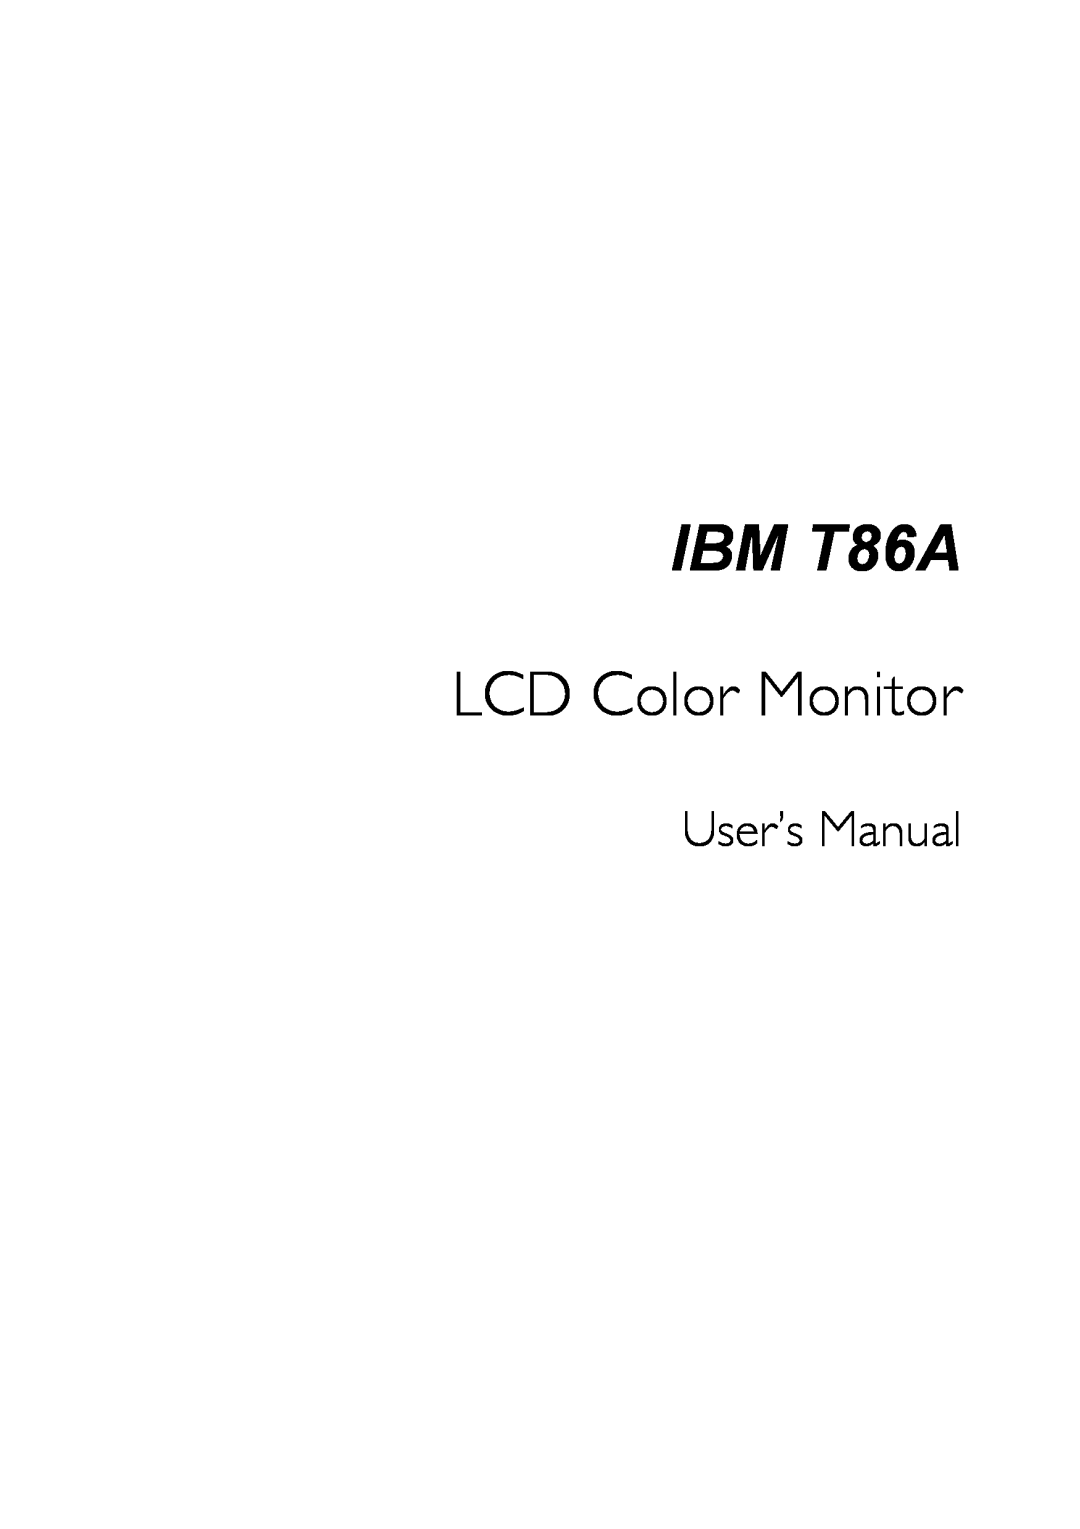 IBM system manual IBM T86A, LCD Color Monitor, User’s Manual 